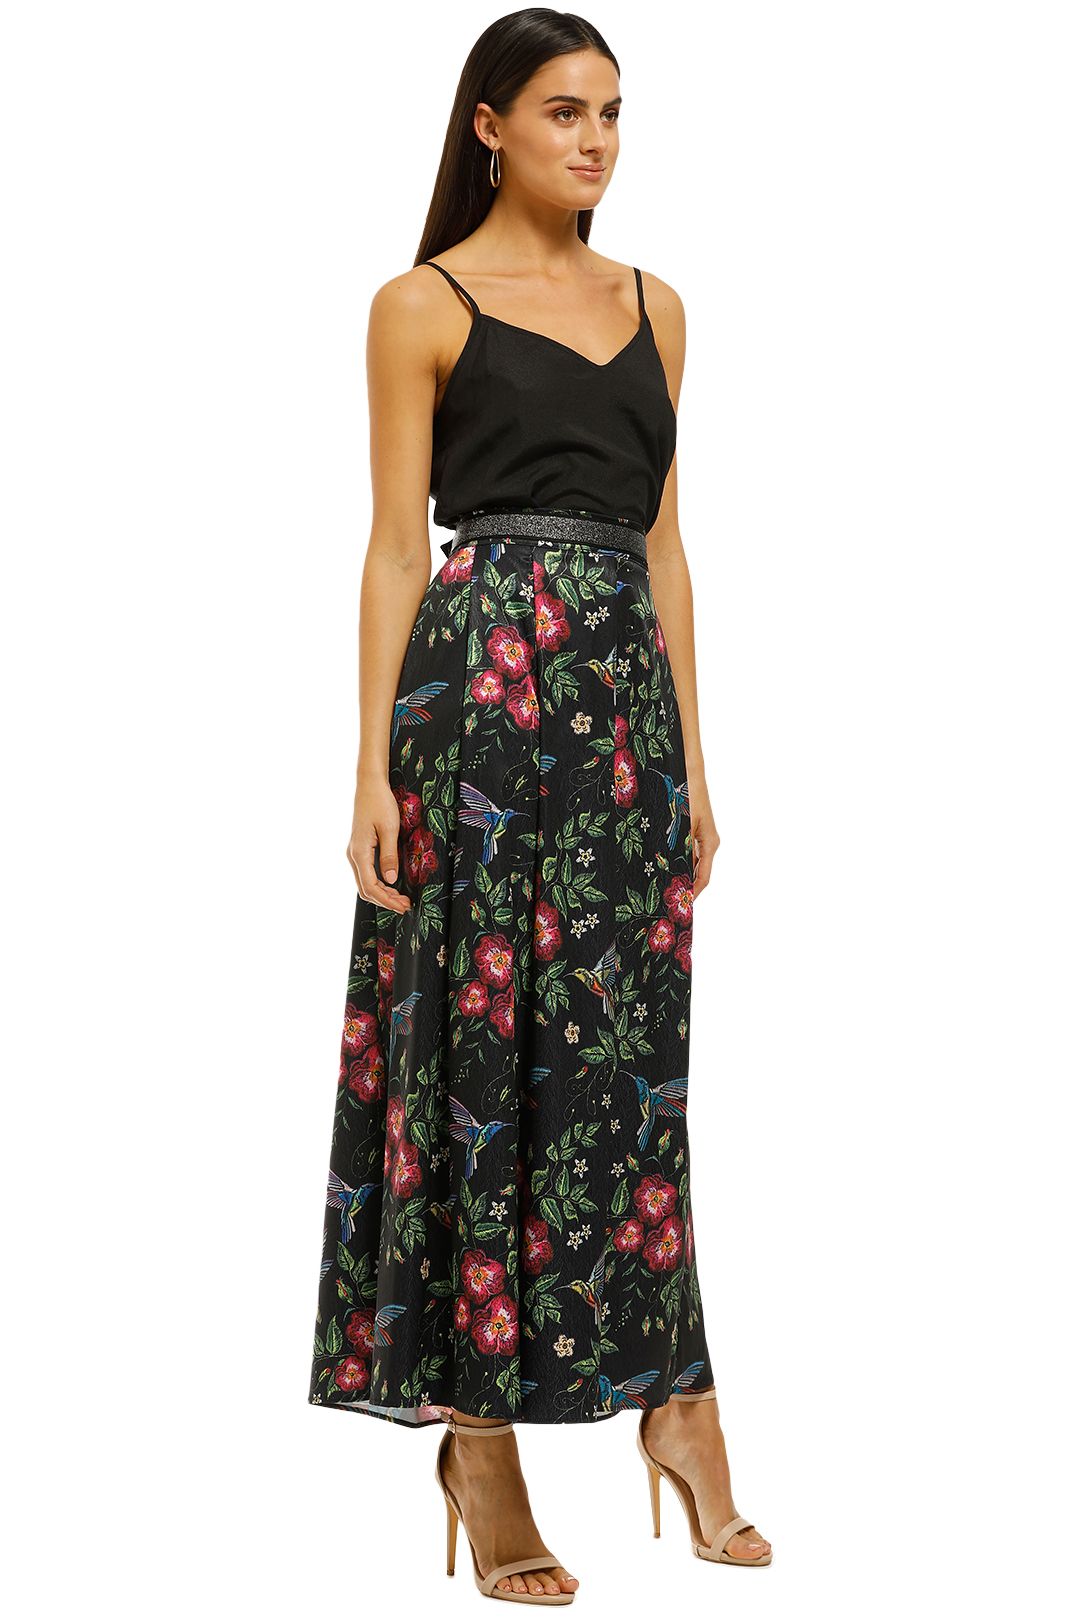 Curate-by-Trelise-Cooper-Not-For-Feather-Pant-Black-Floral-Side